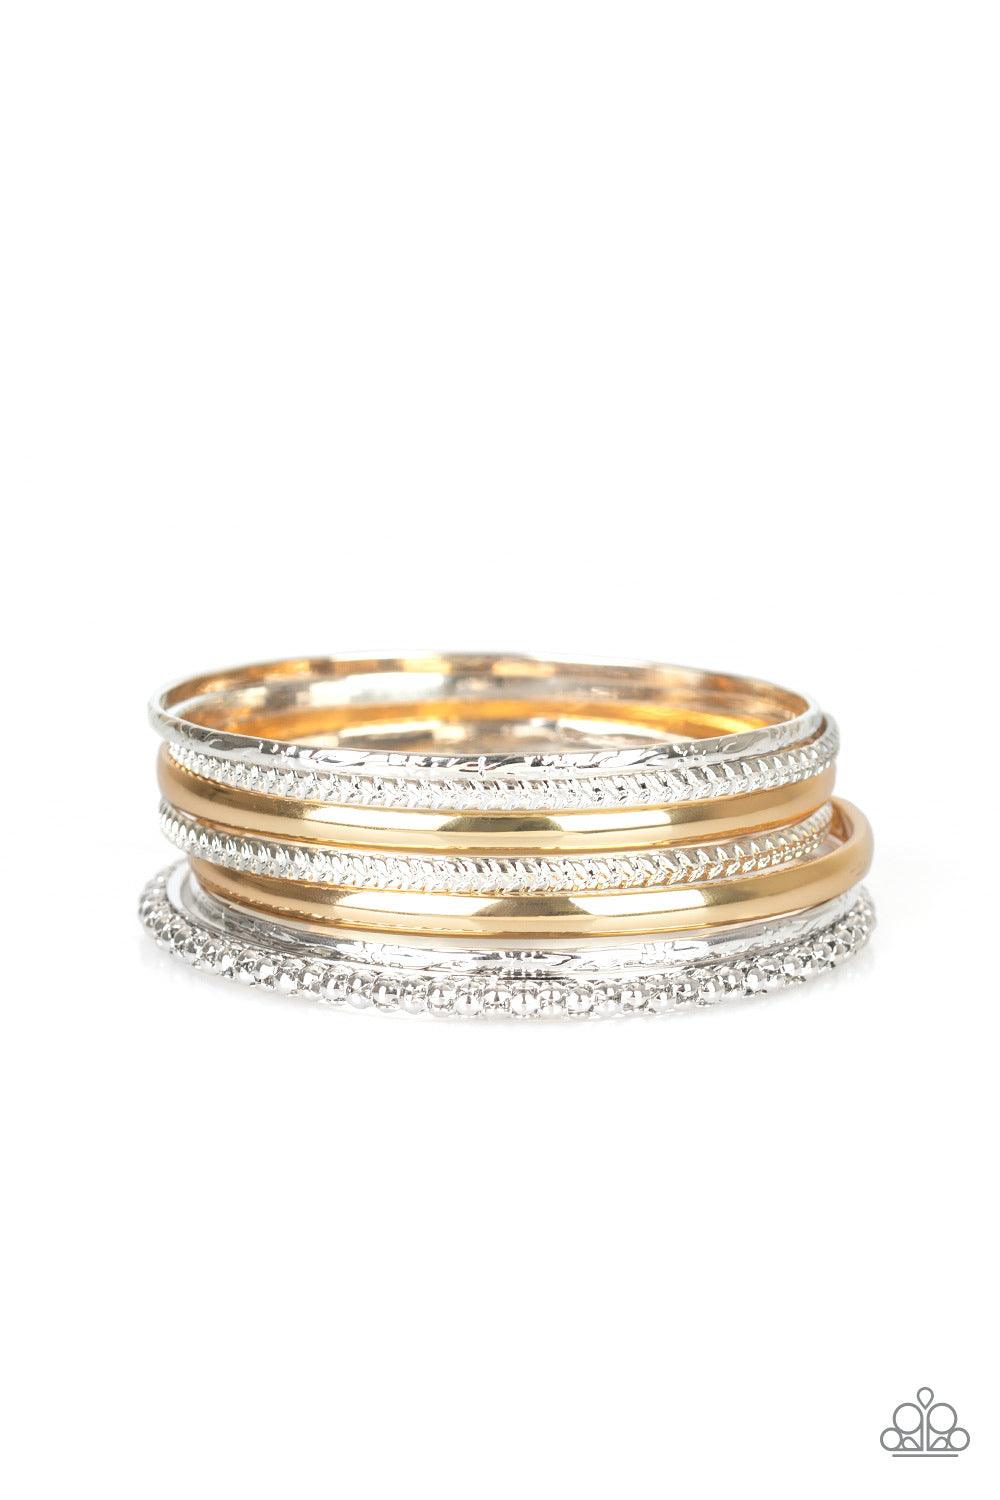 Paparazzi Accessories Hit The Stack - Silver Varying in texture and width, a collision of silver, and gold bangles slide up and down the wrist for a bold, industrial look. Jewelry